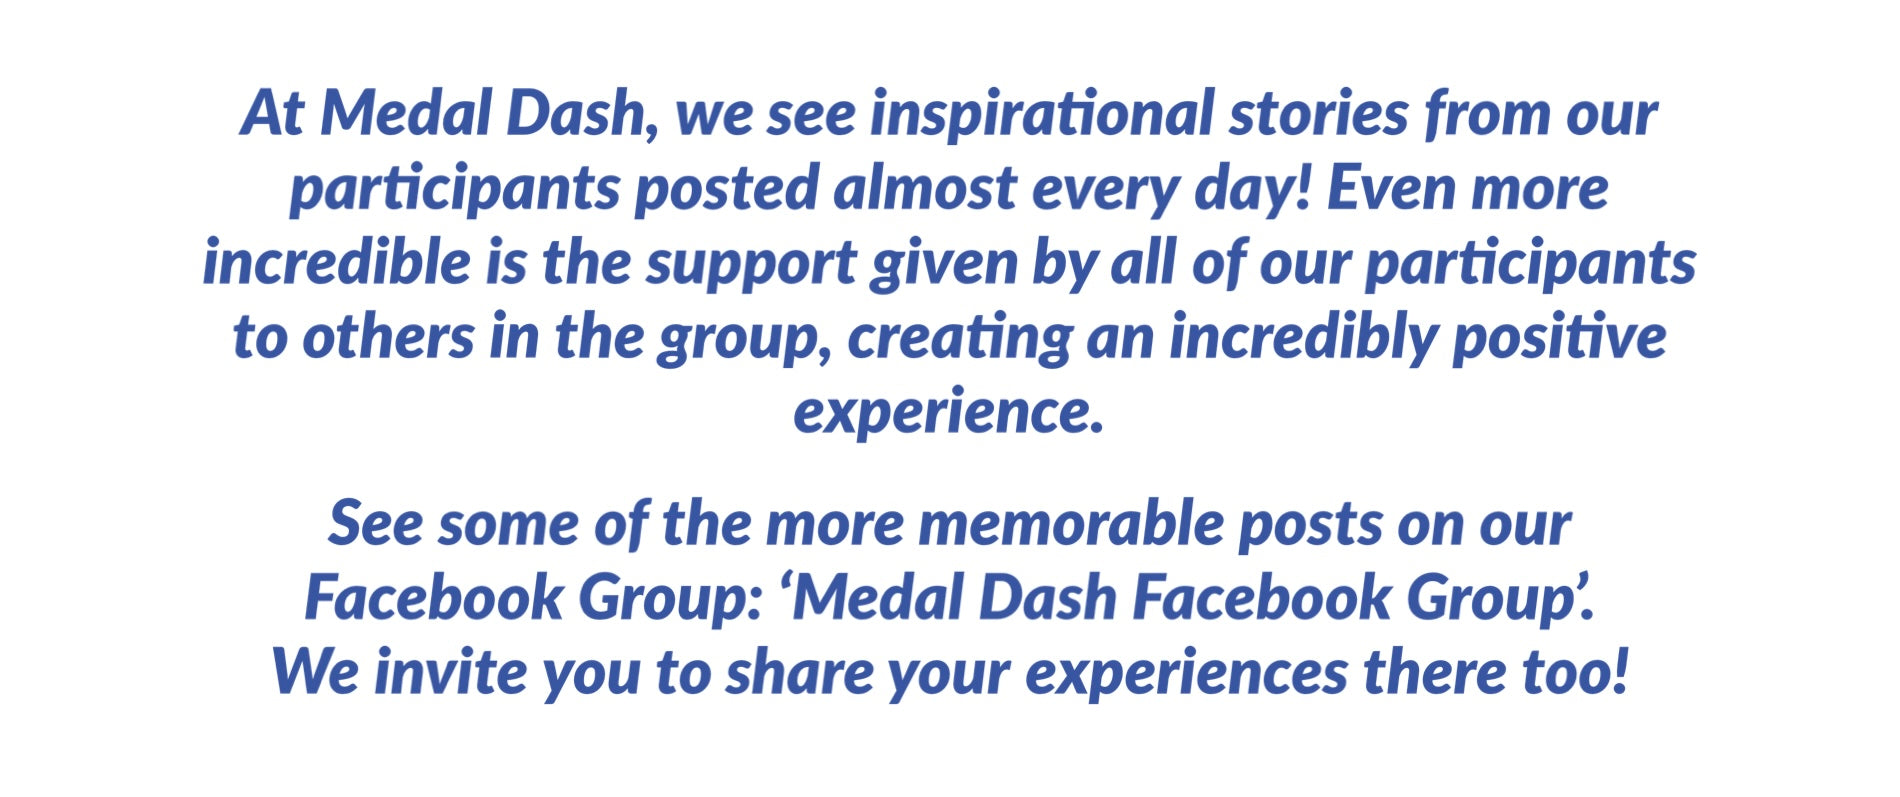 medal dash inspiration - check our our facebook group page